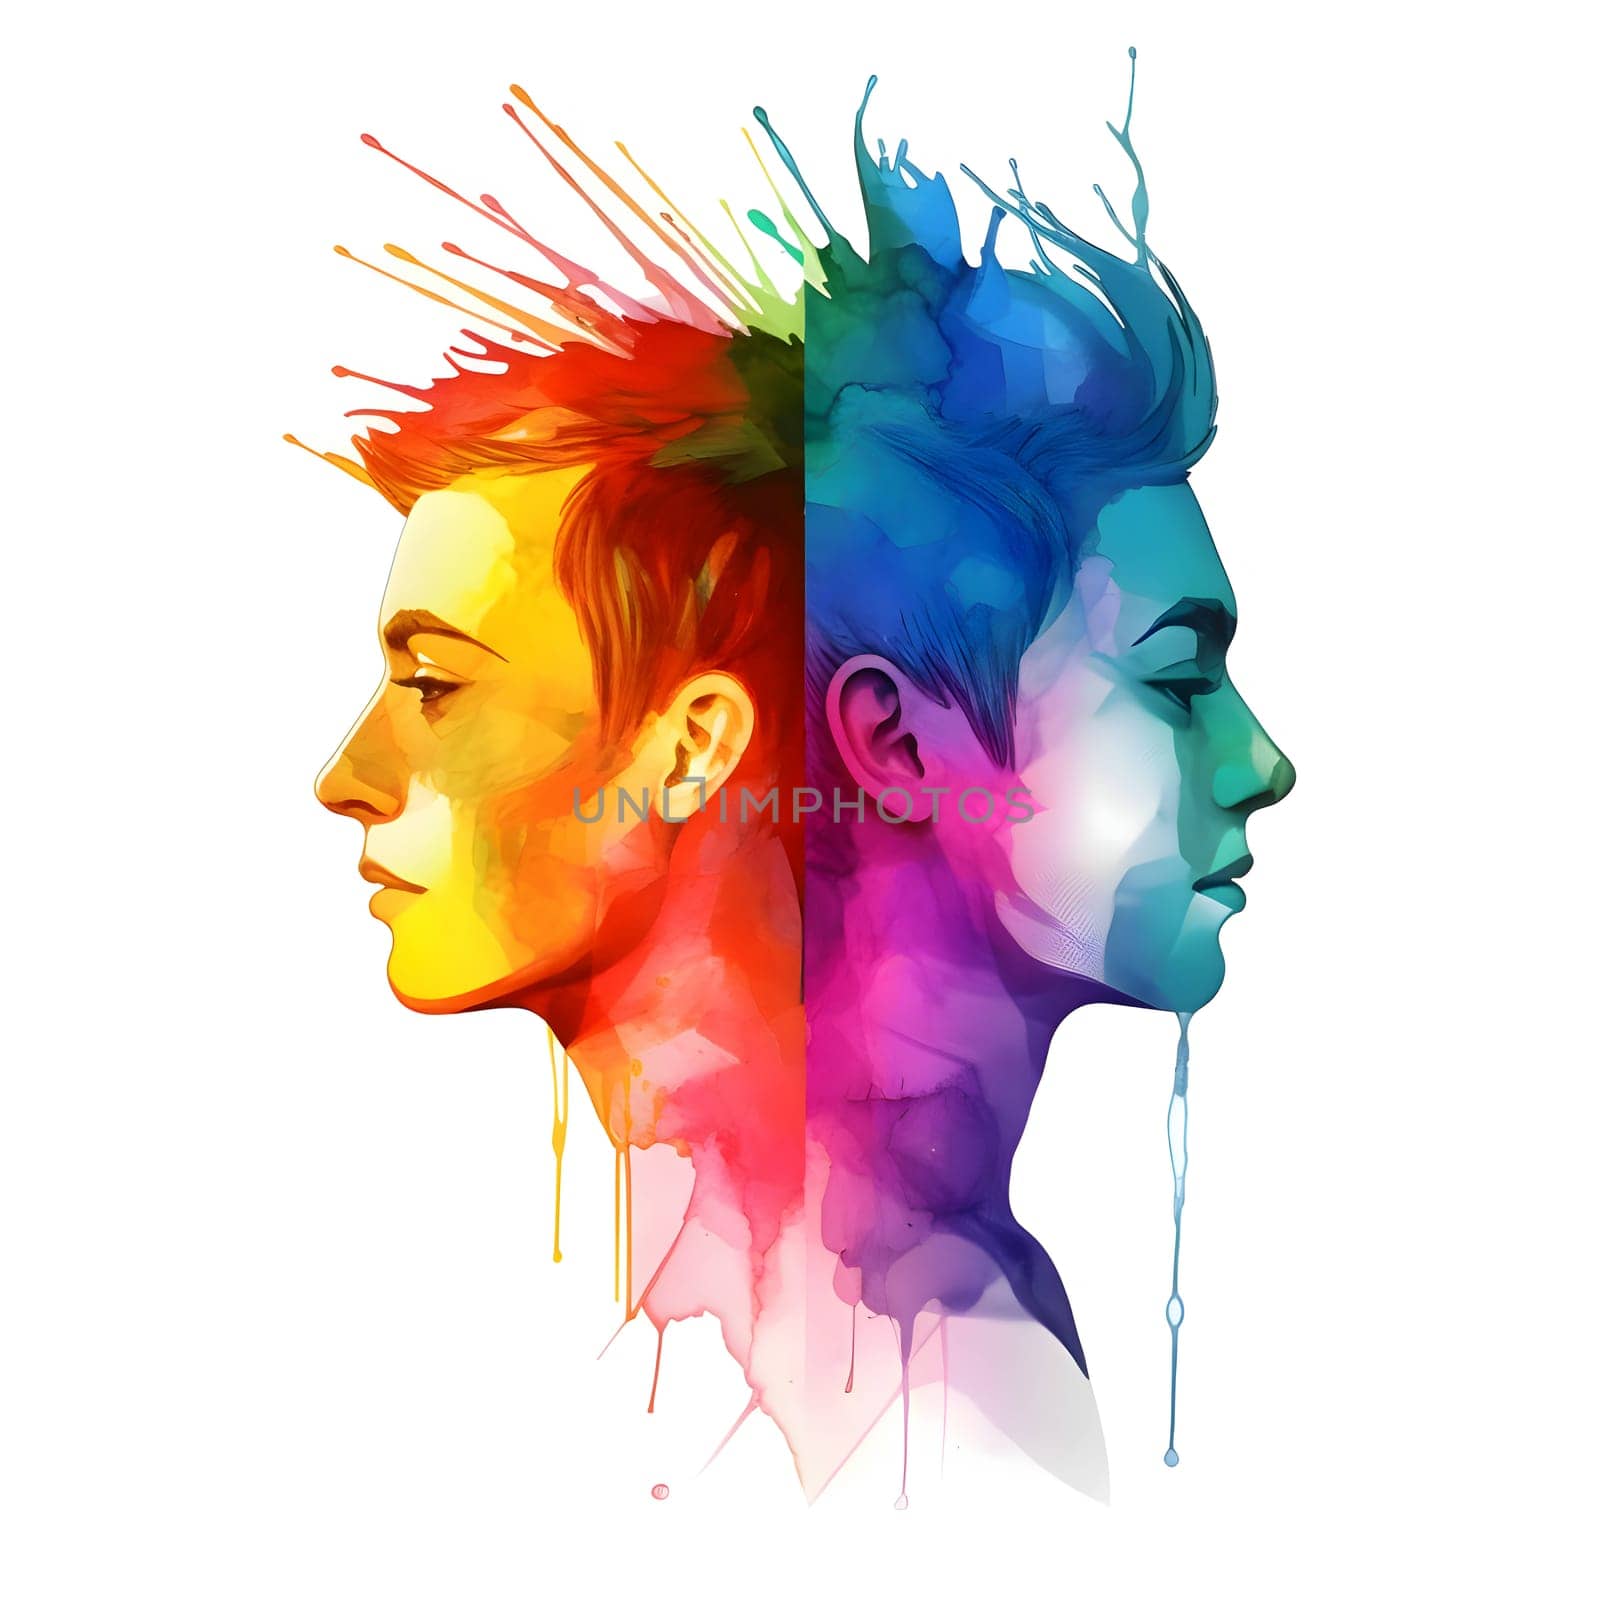 Illustration of two people's heads back-to-back, forming an LGBT graphics logo, representing unity, diversity, and support for the LGBTQ+ community.